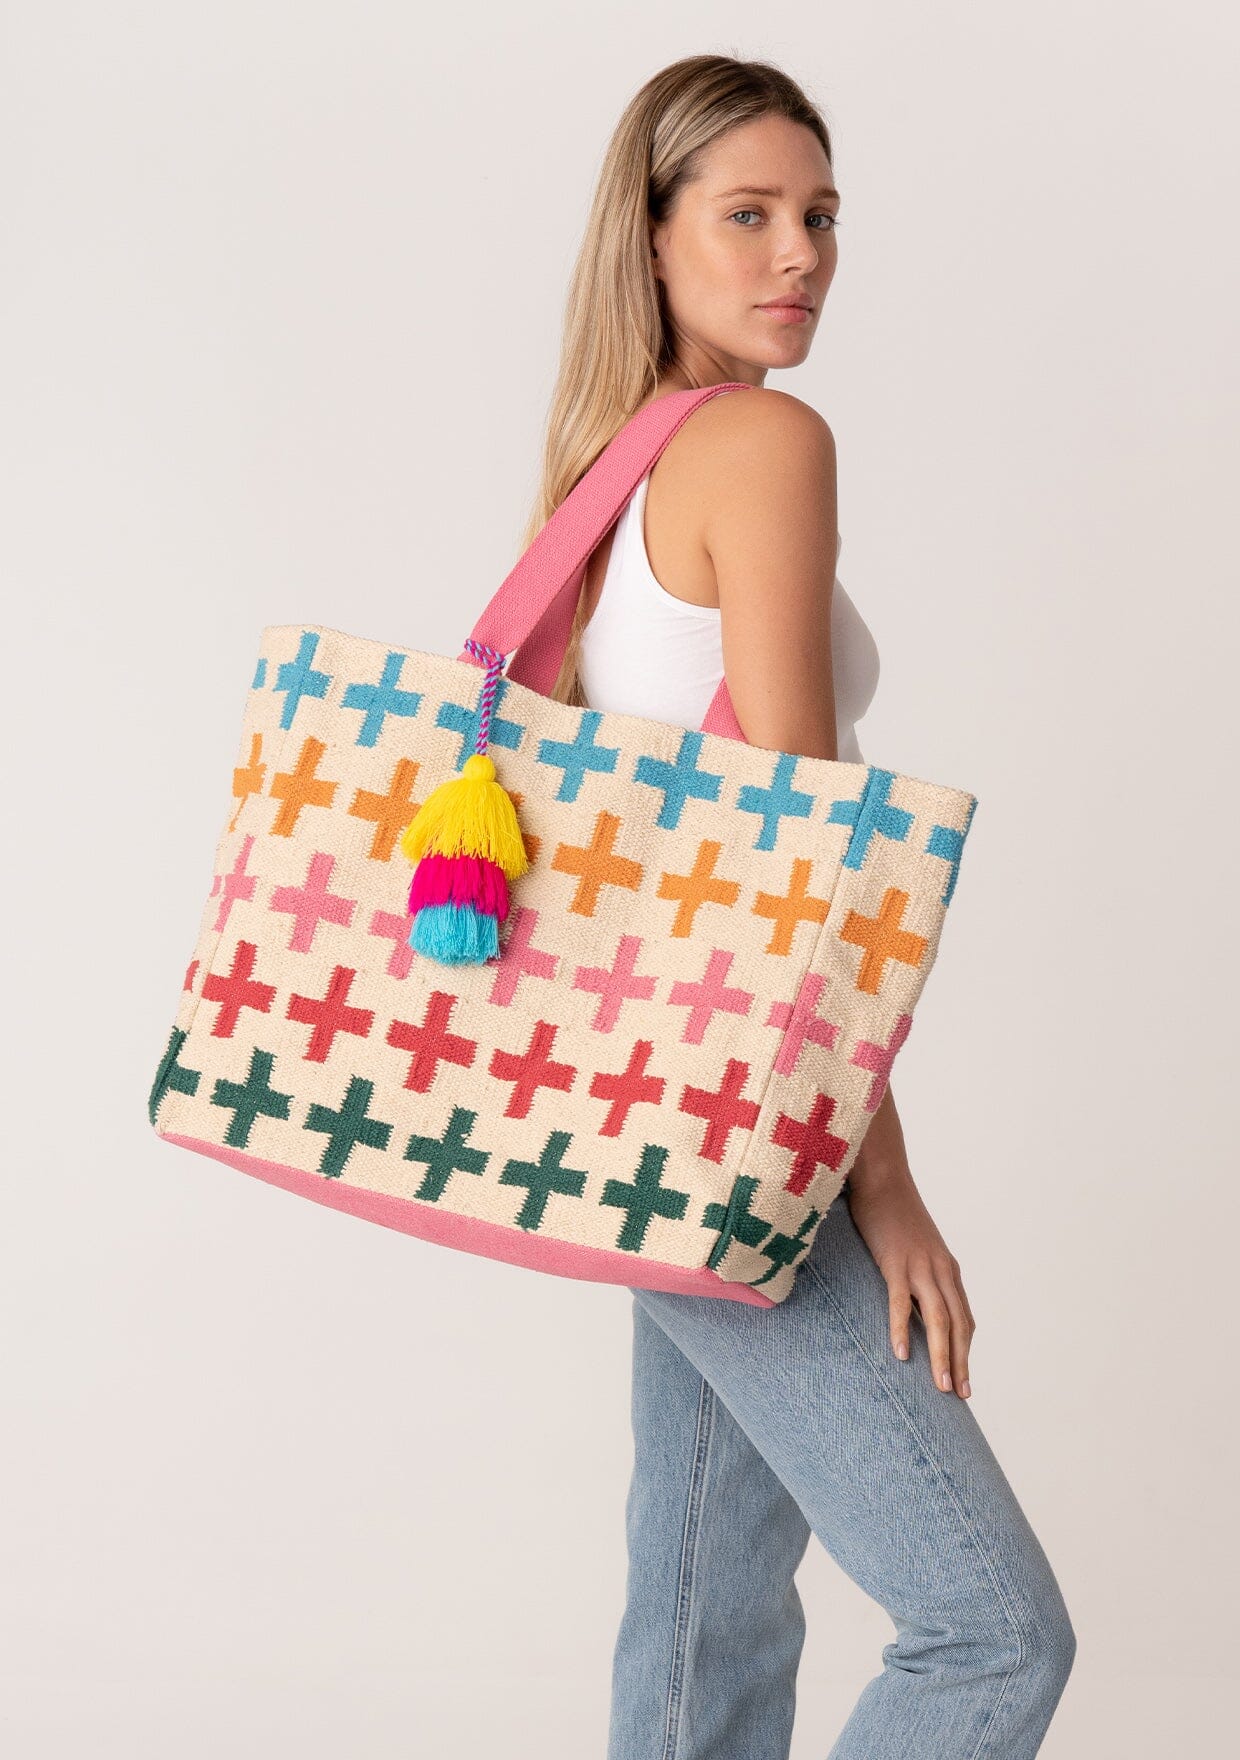 Marshalls Holiday Tote Bags for Women